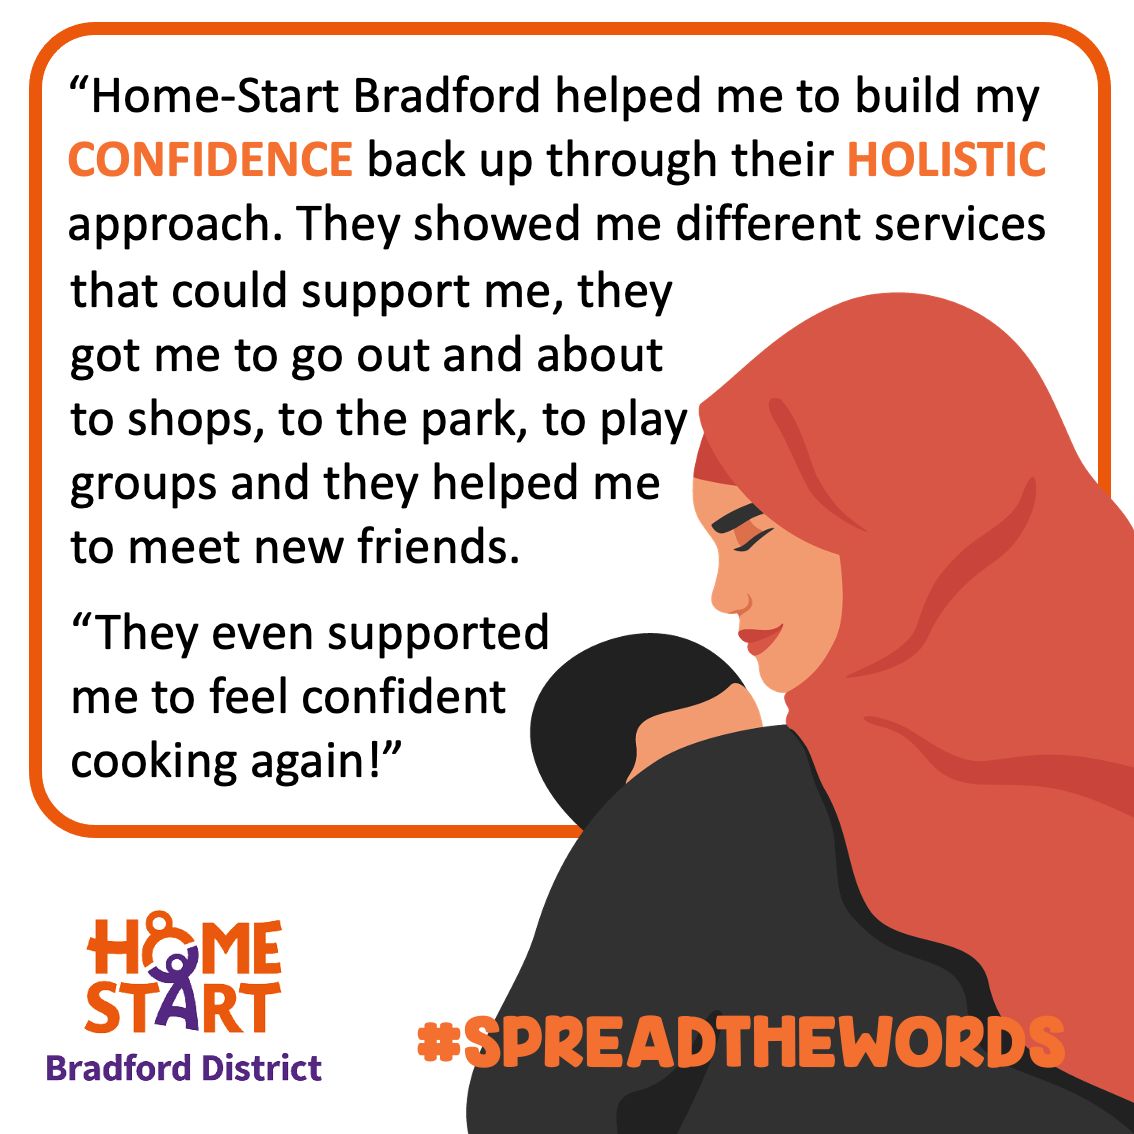 We spoke to a mum this week who has been supported by us. She told us how we have helped build her CONFIDENCE through our HOLISTIC approach of addressing many different needs that families have.

Help #SpreadTheWords here: buff.ly/48z1Xde 

#25Years @homestartuk